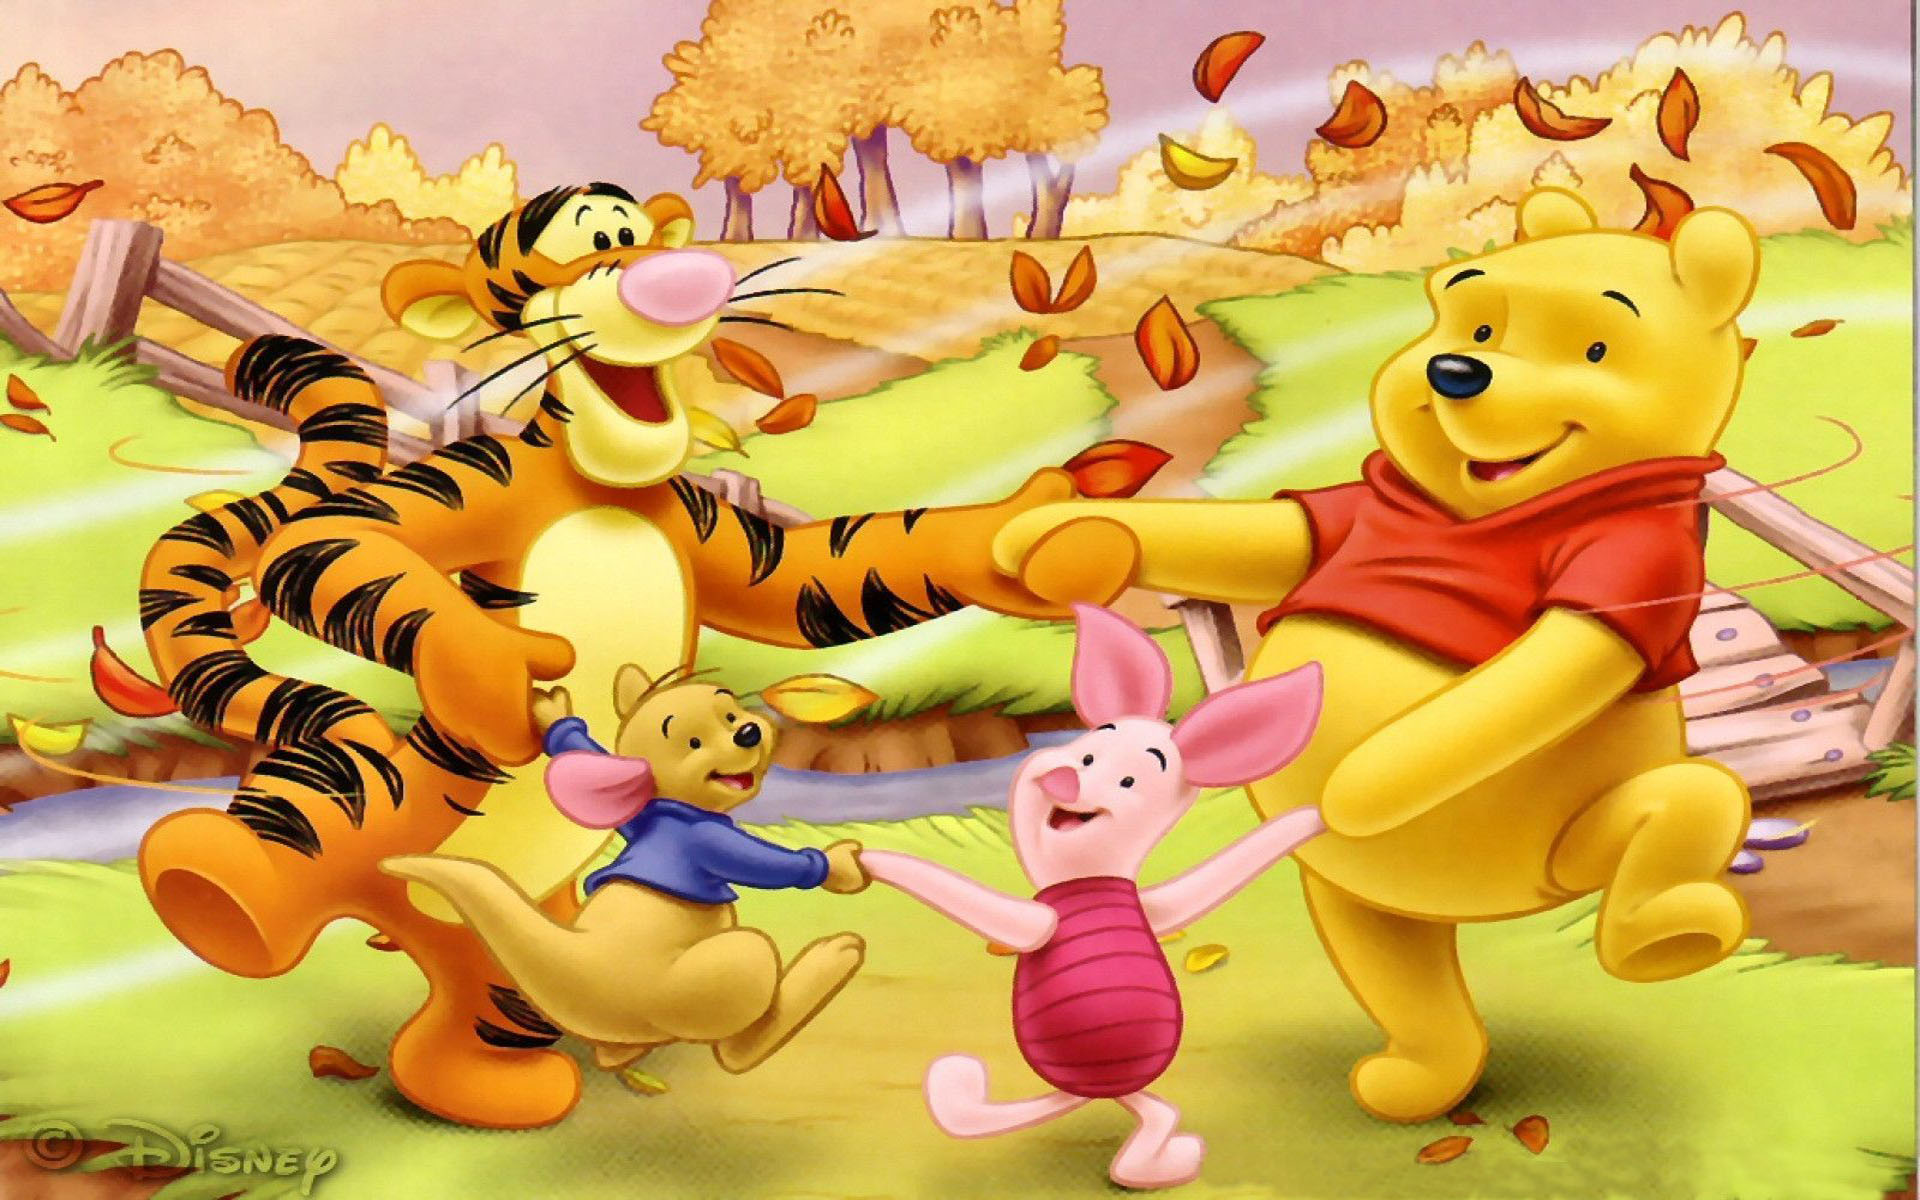 Winnie The Pooh And Merry Friends Cartoon Autumn Wallpapers Hd 1920x1200.